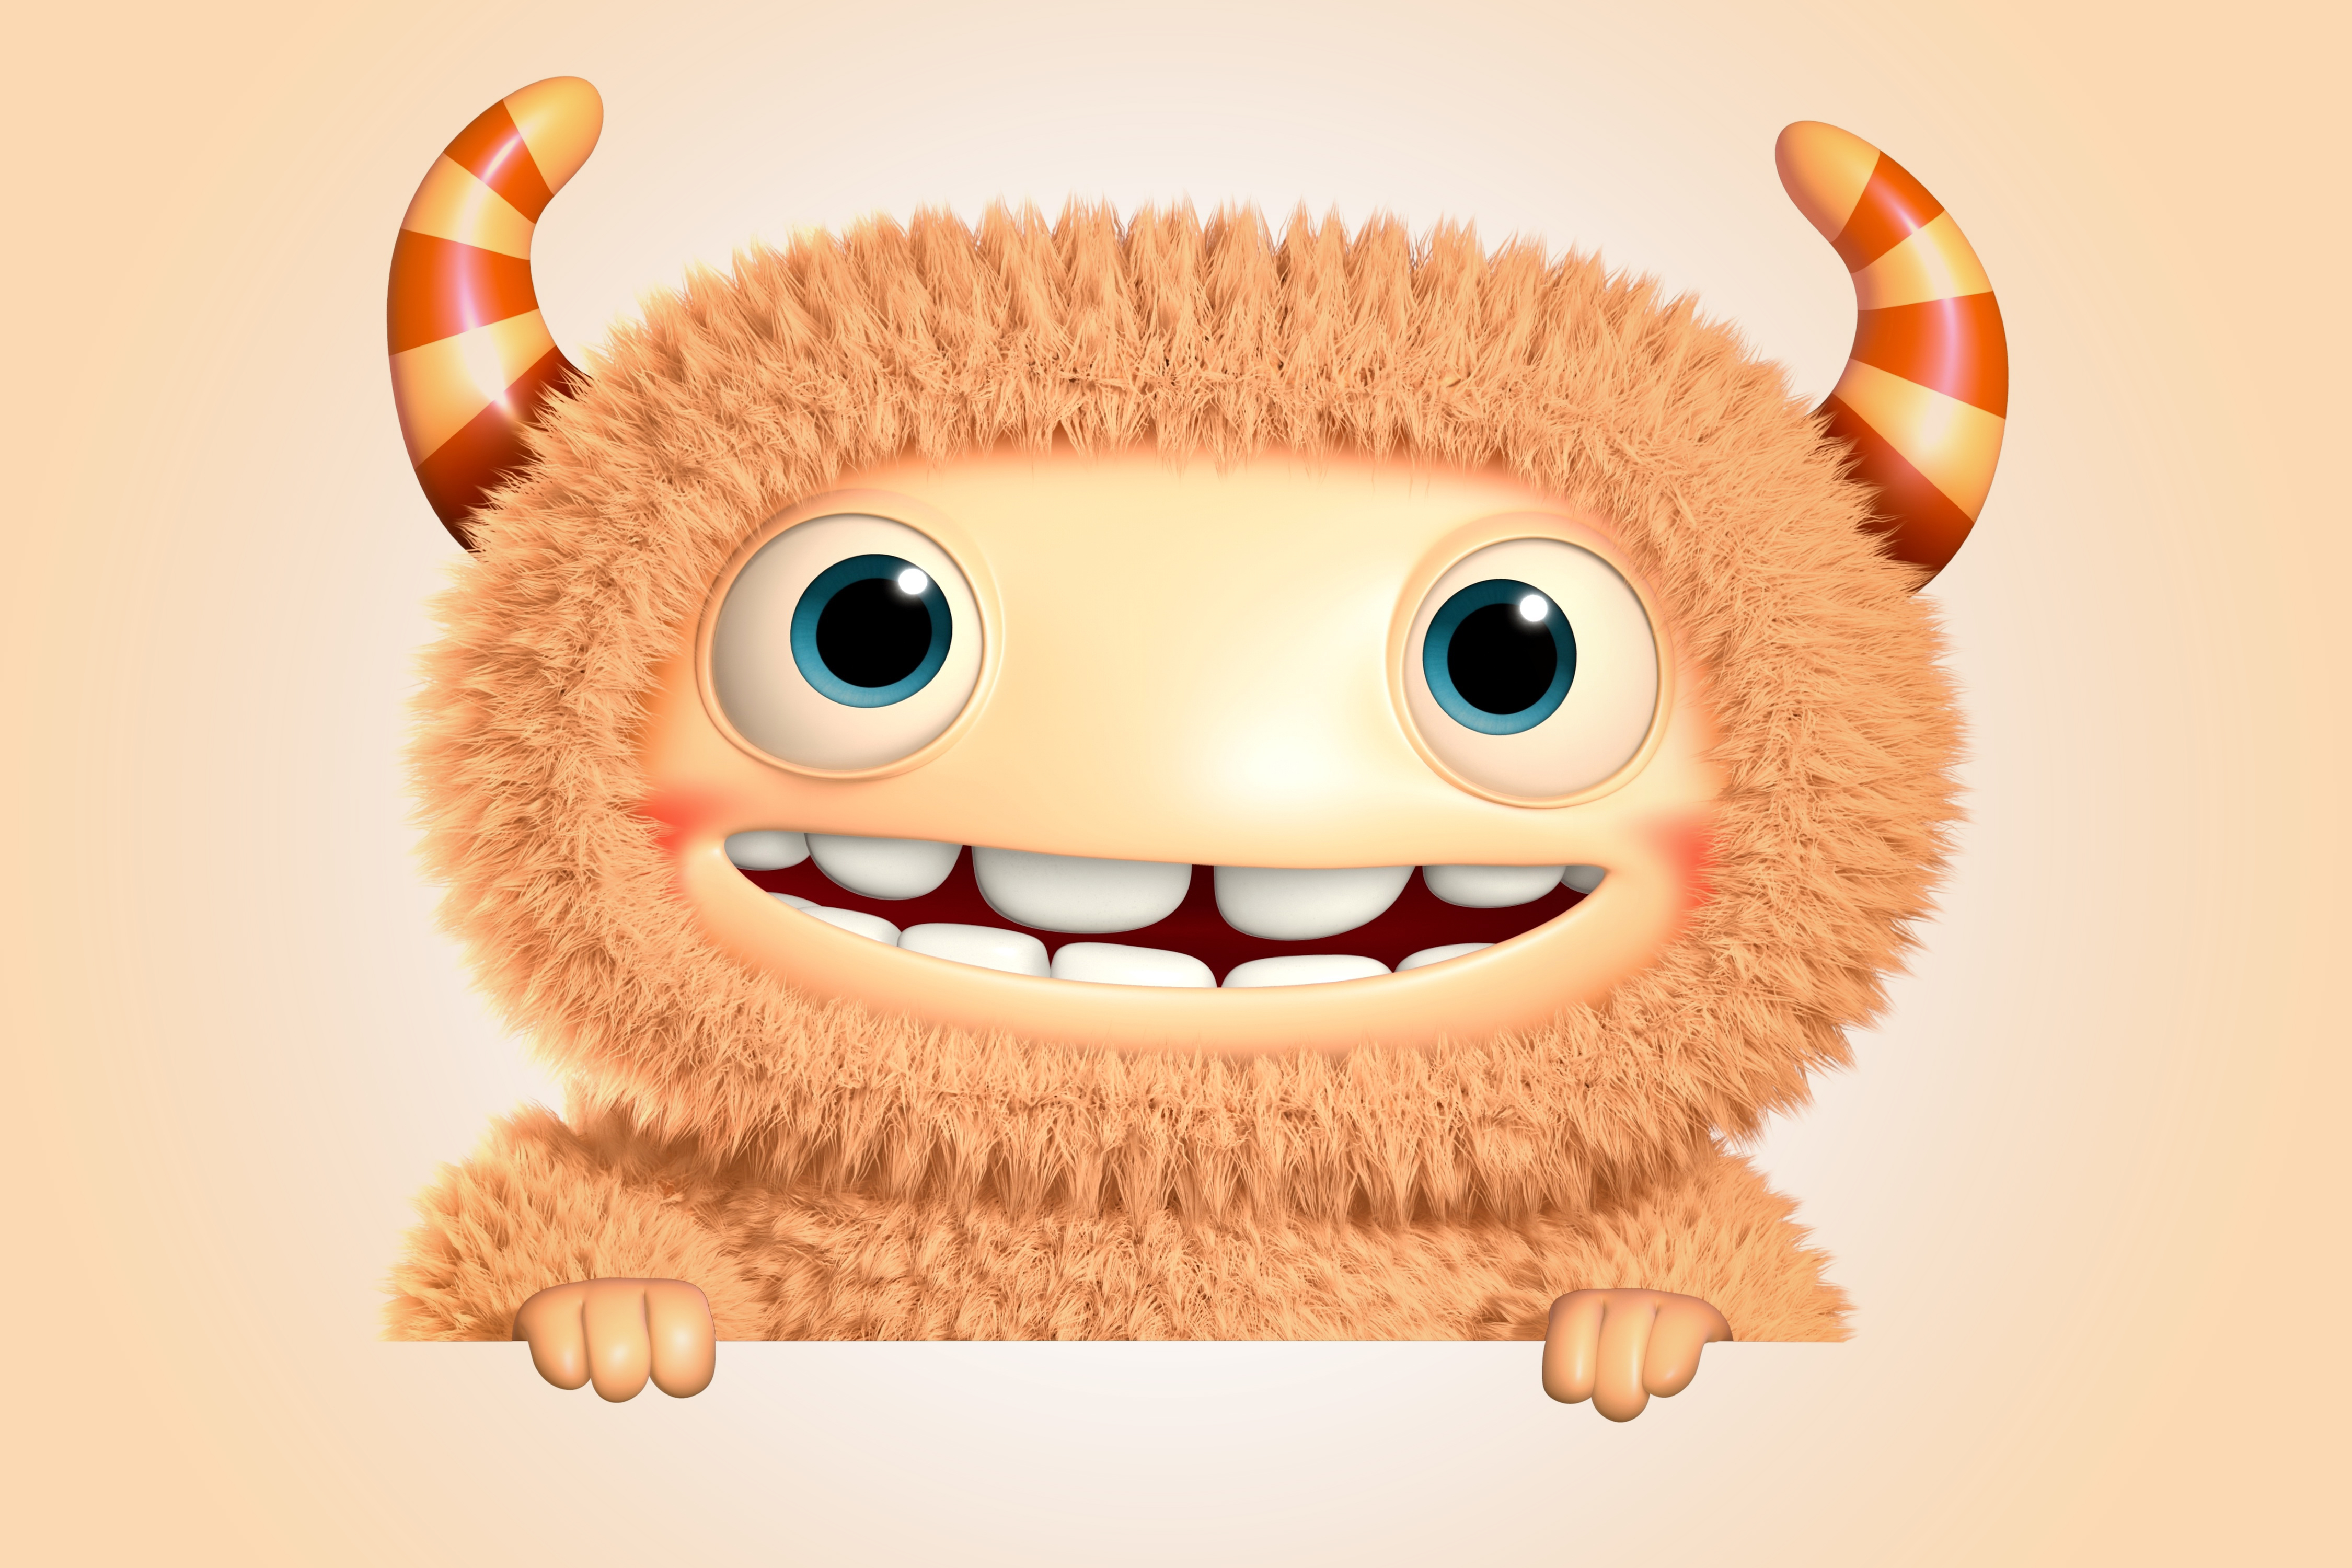 Wallpaper 3d Funny Monster Cartoon Cute Smile Character